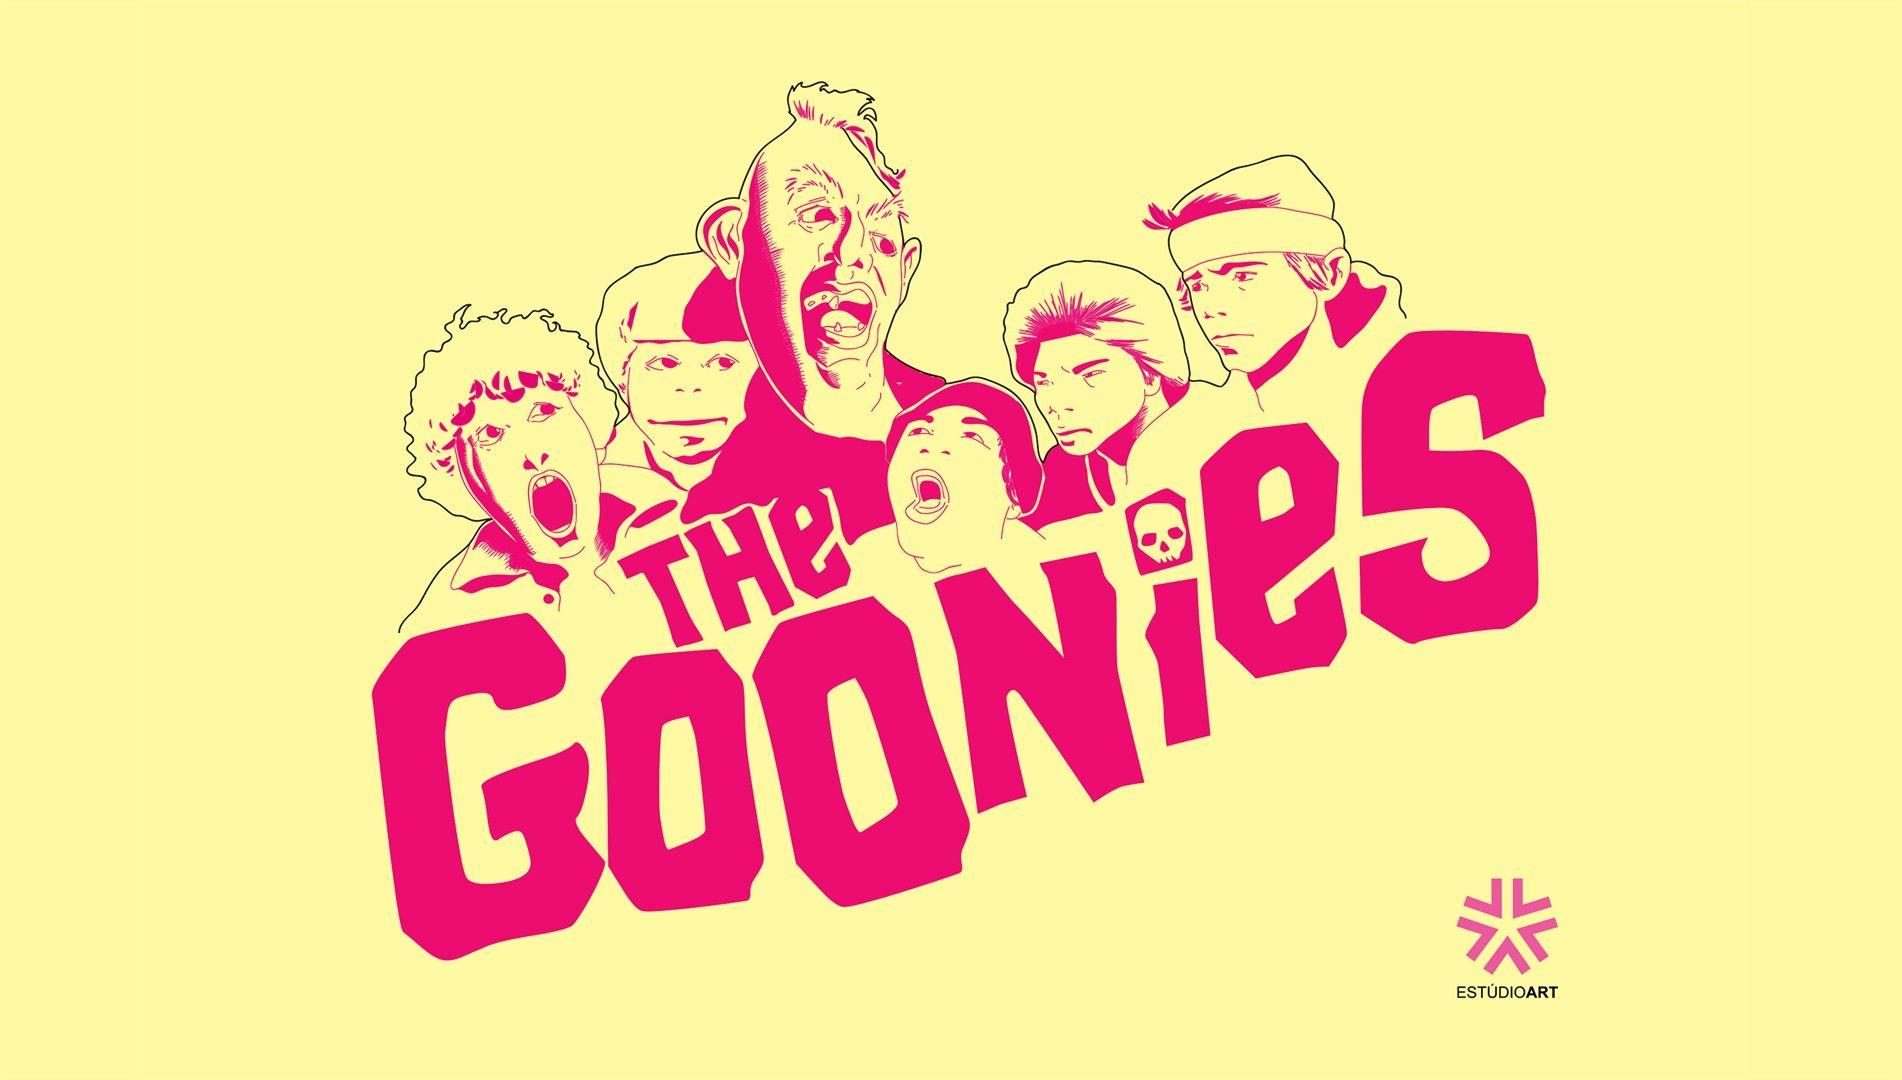 Anyone a fan of the Goonies?